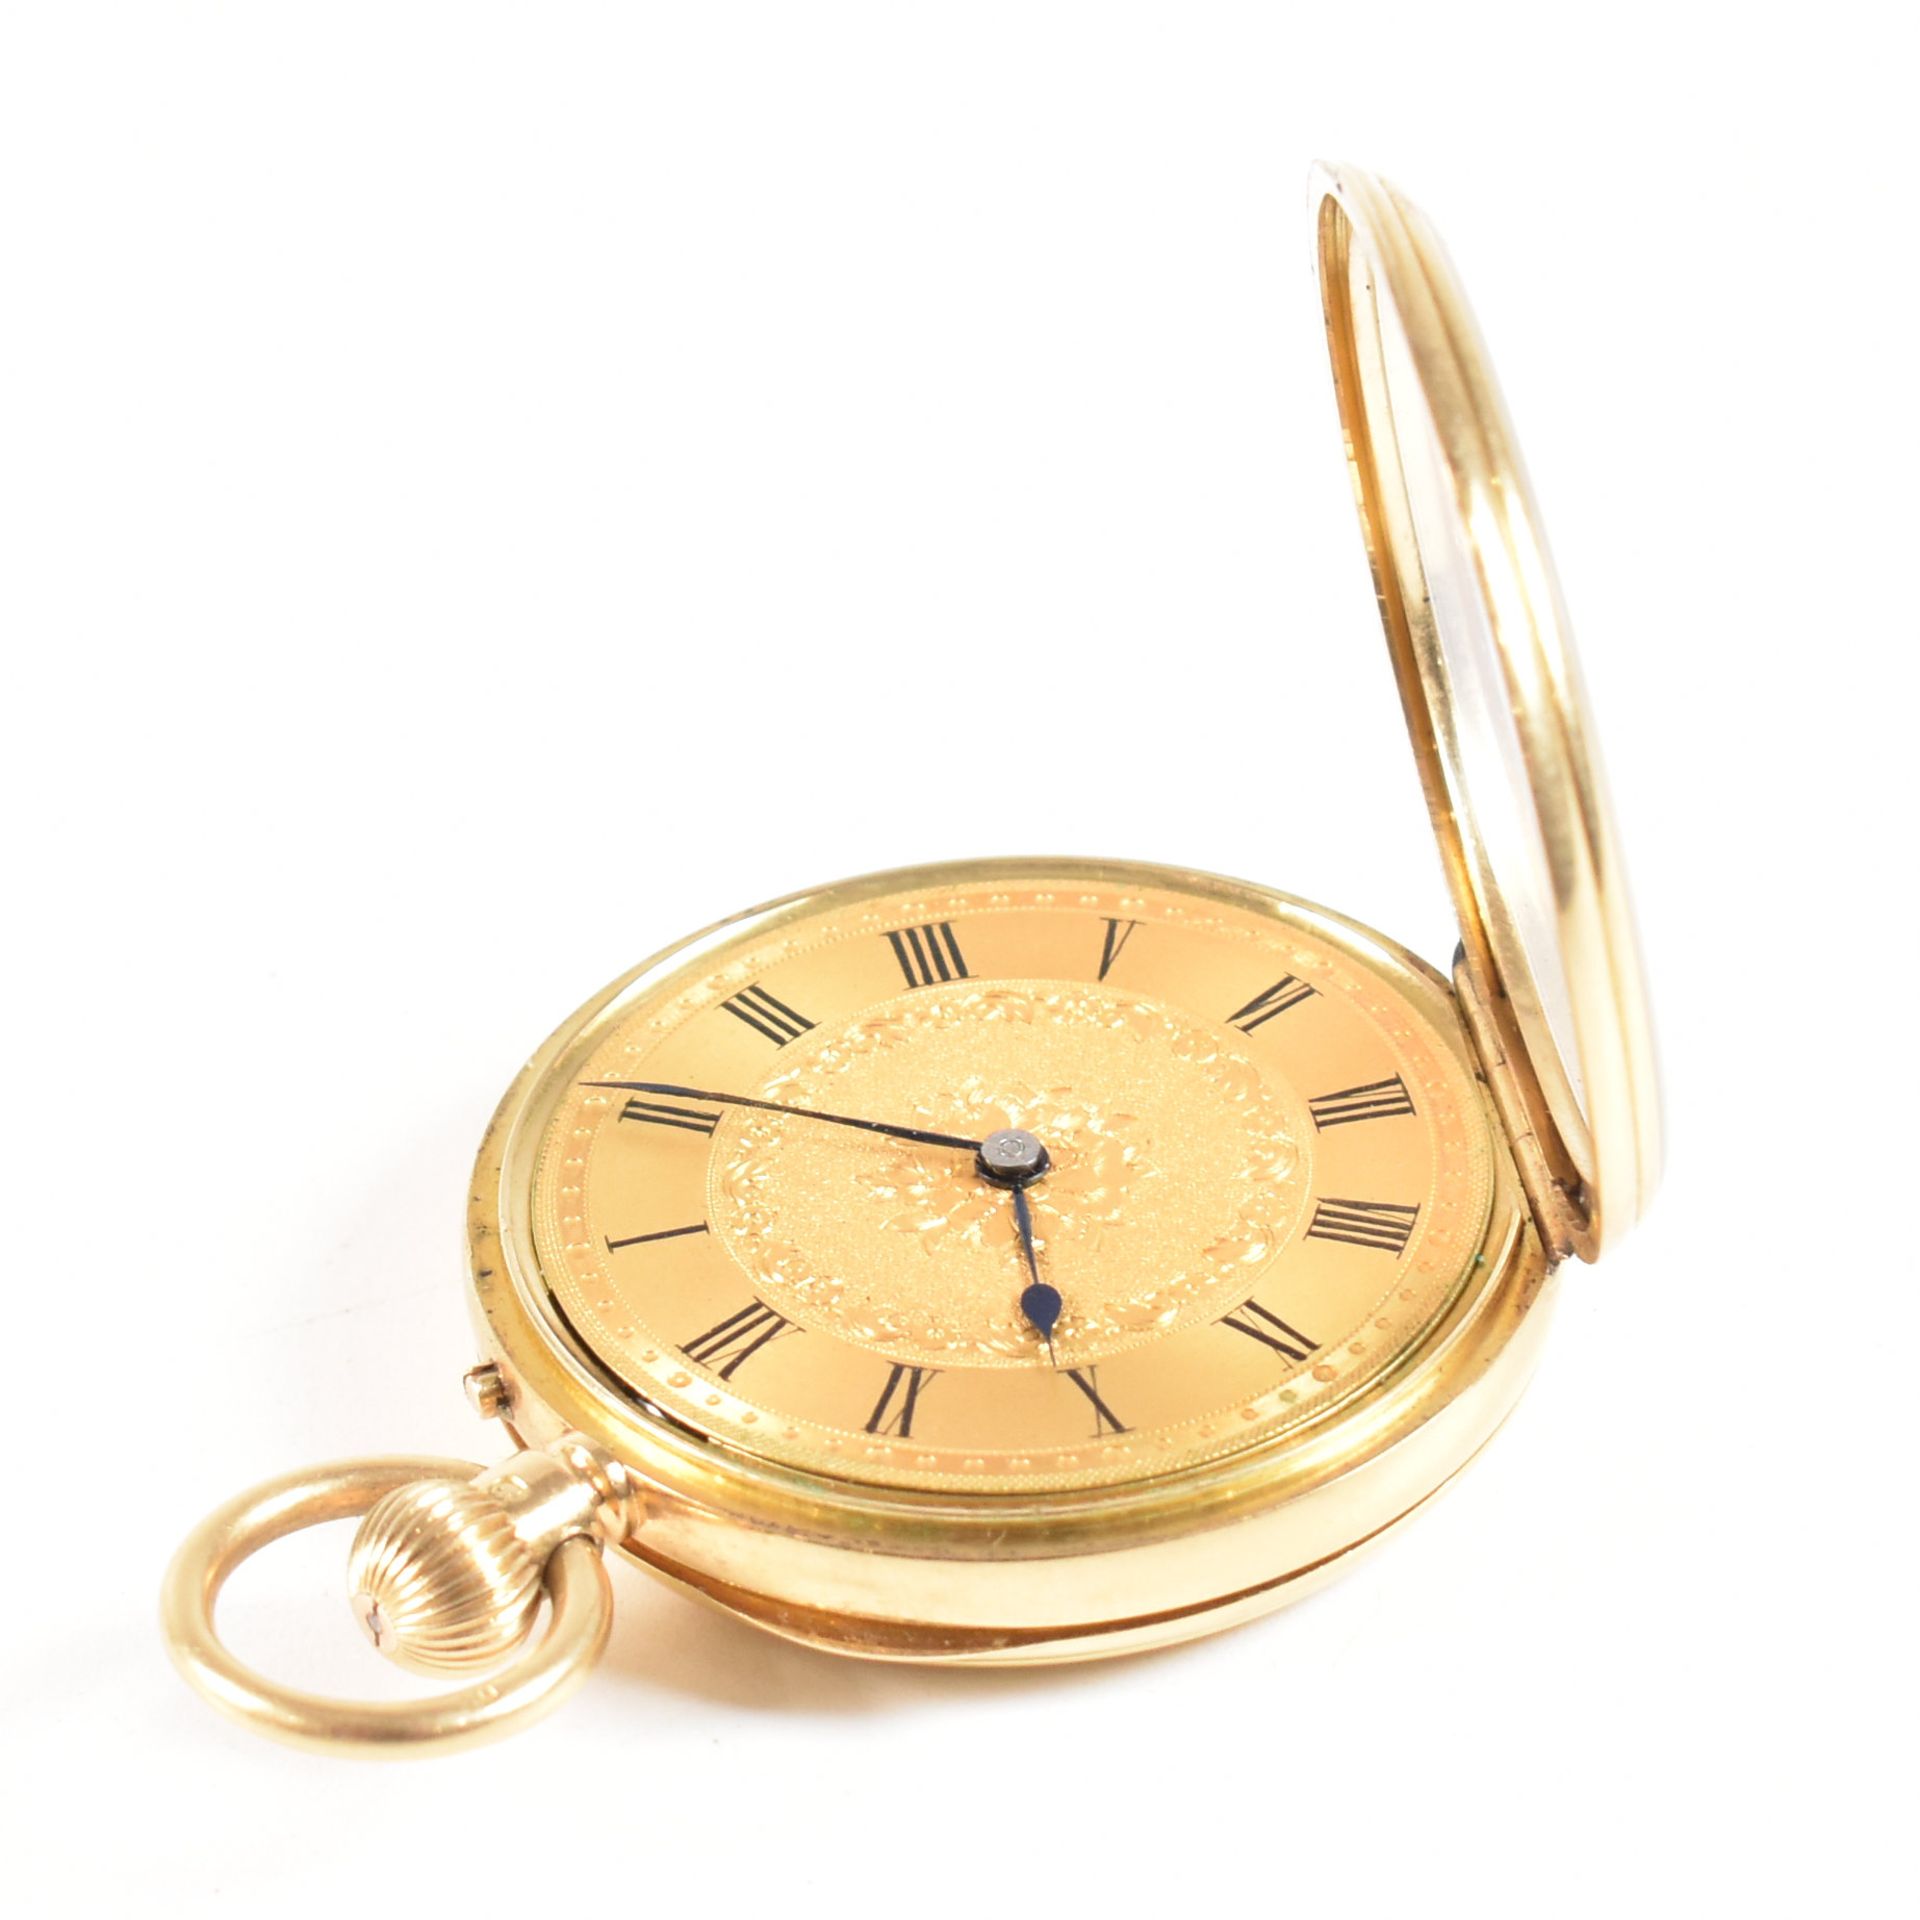 HALLMARKED 18CT GOLD OPEN FACE POCKET WATCH. - Image 7 of 7